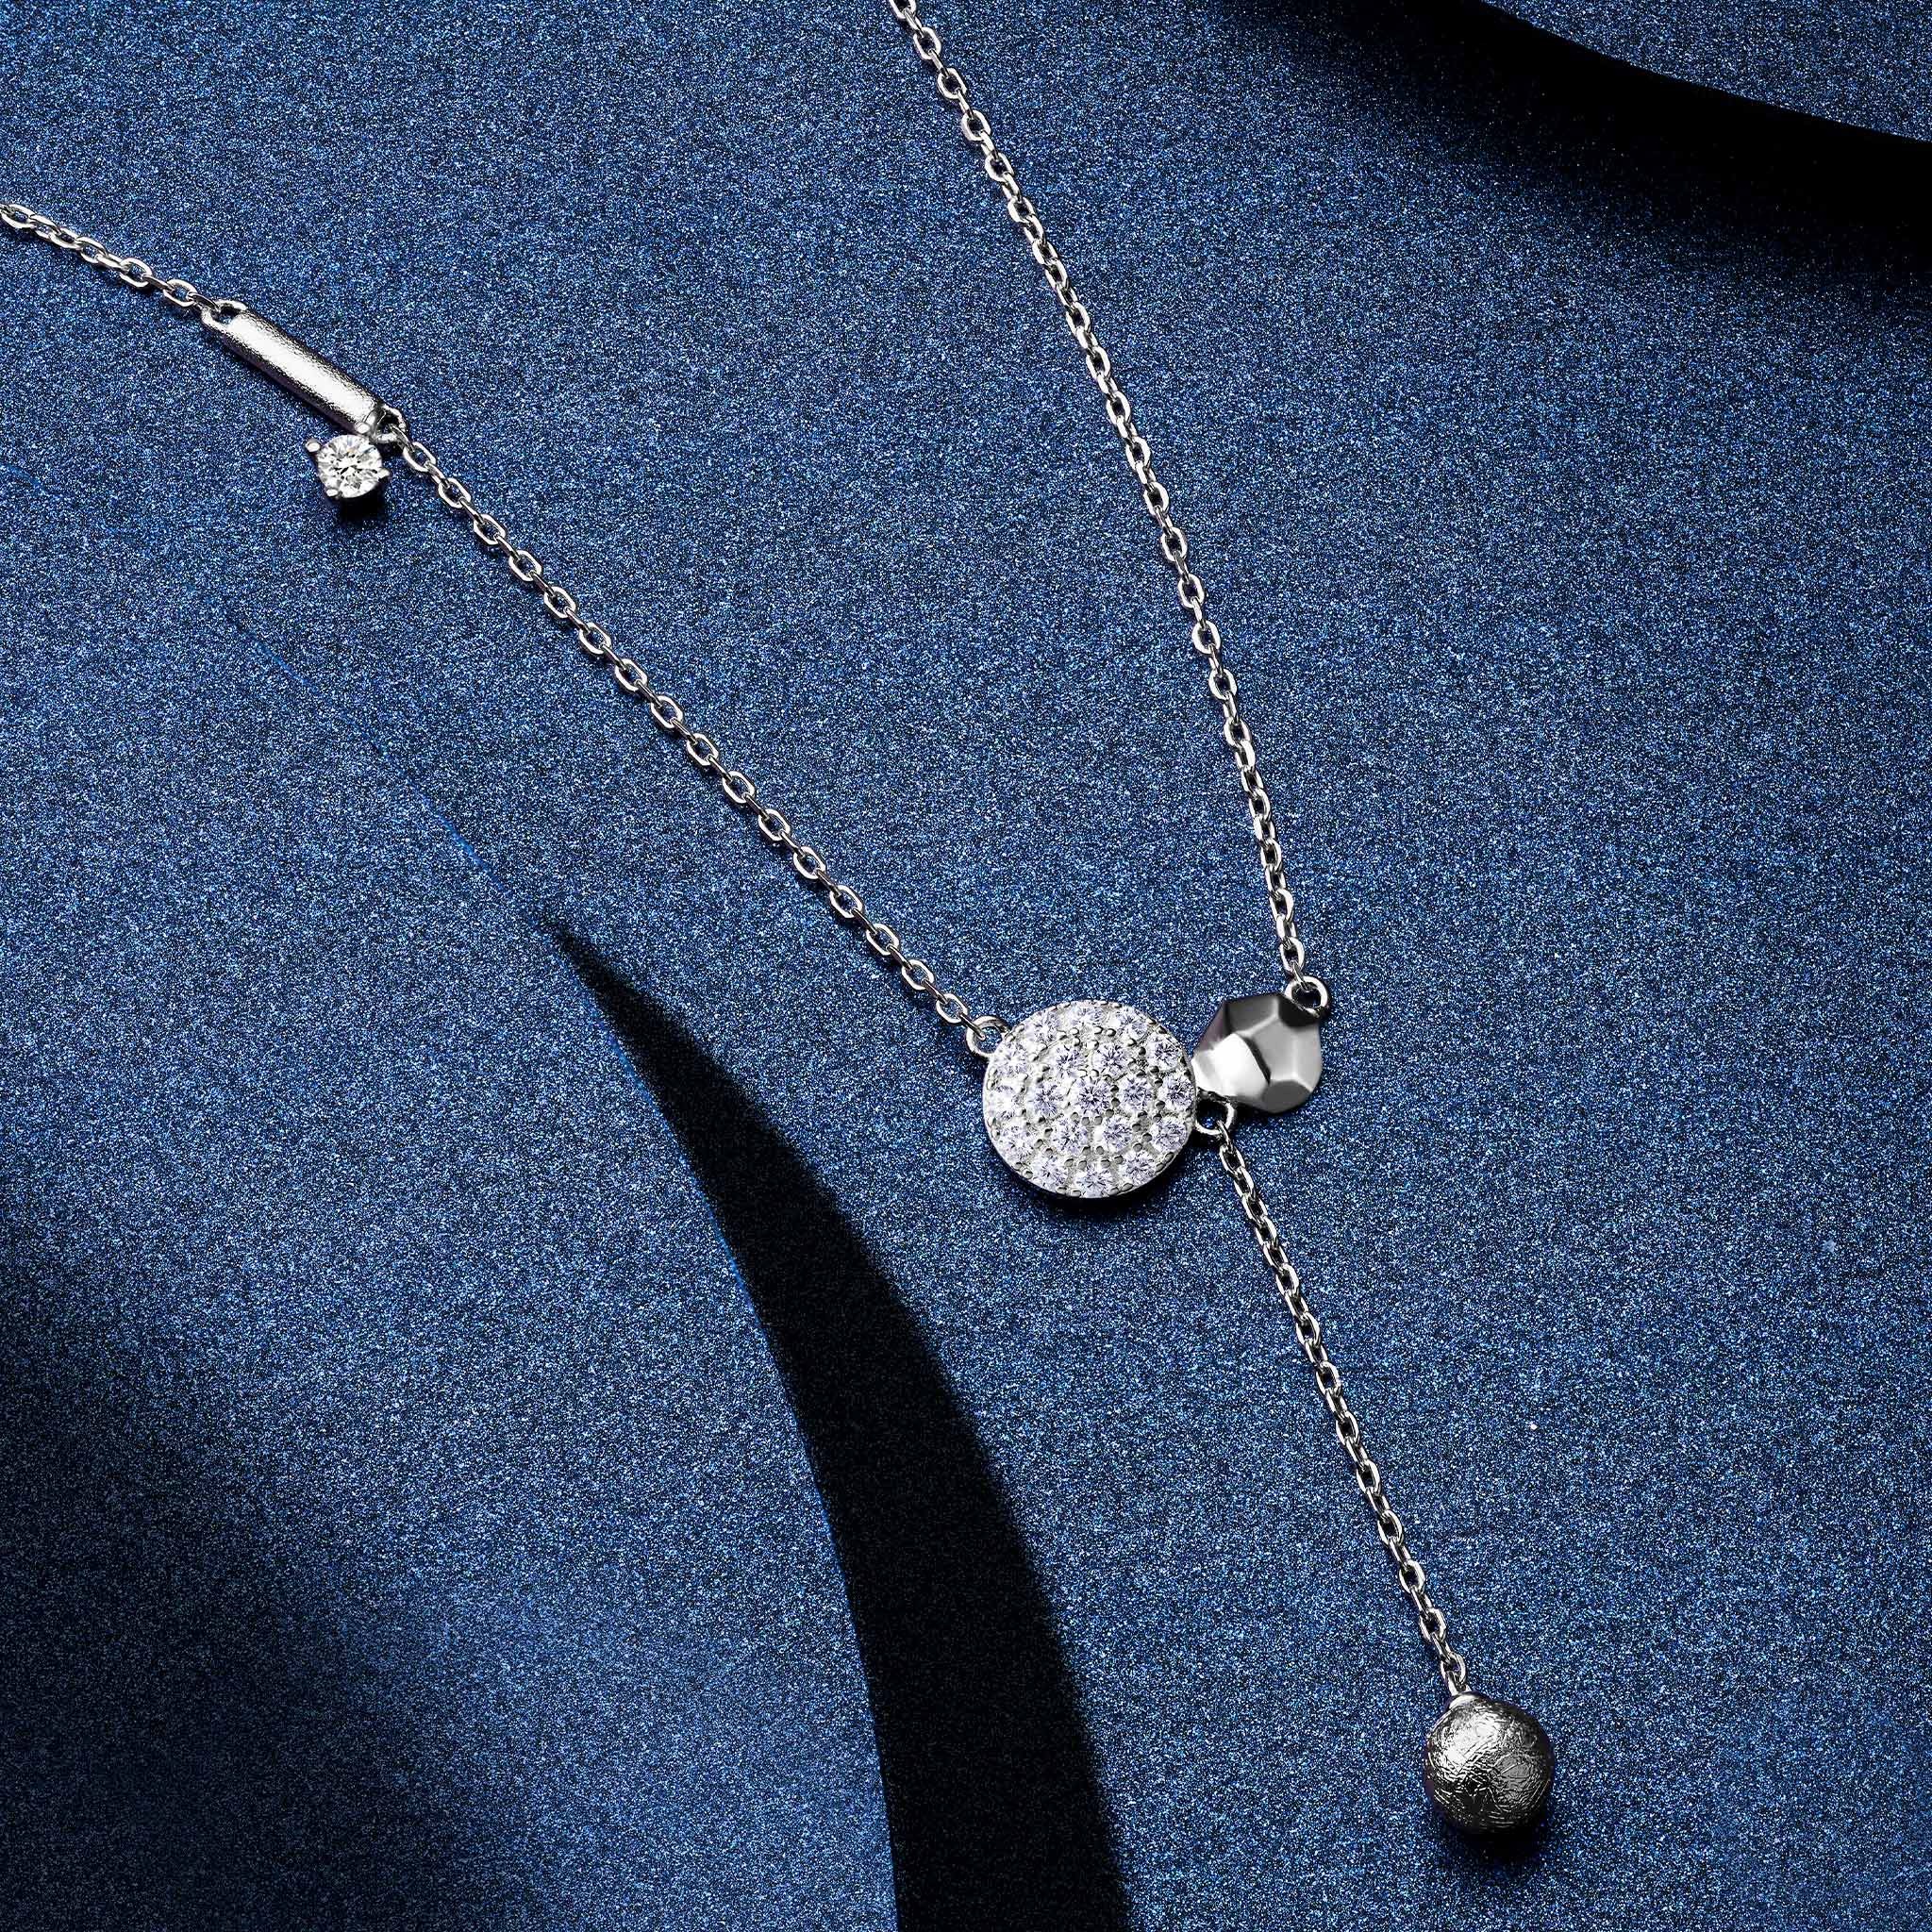 Women's Dark Sky Park Necklace with Meteorite Necklaces WAA FASHION GROUP 